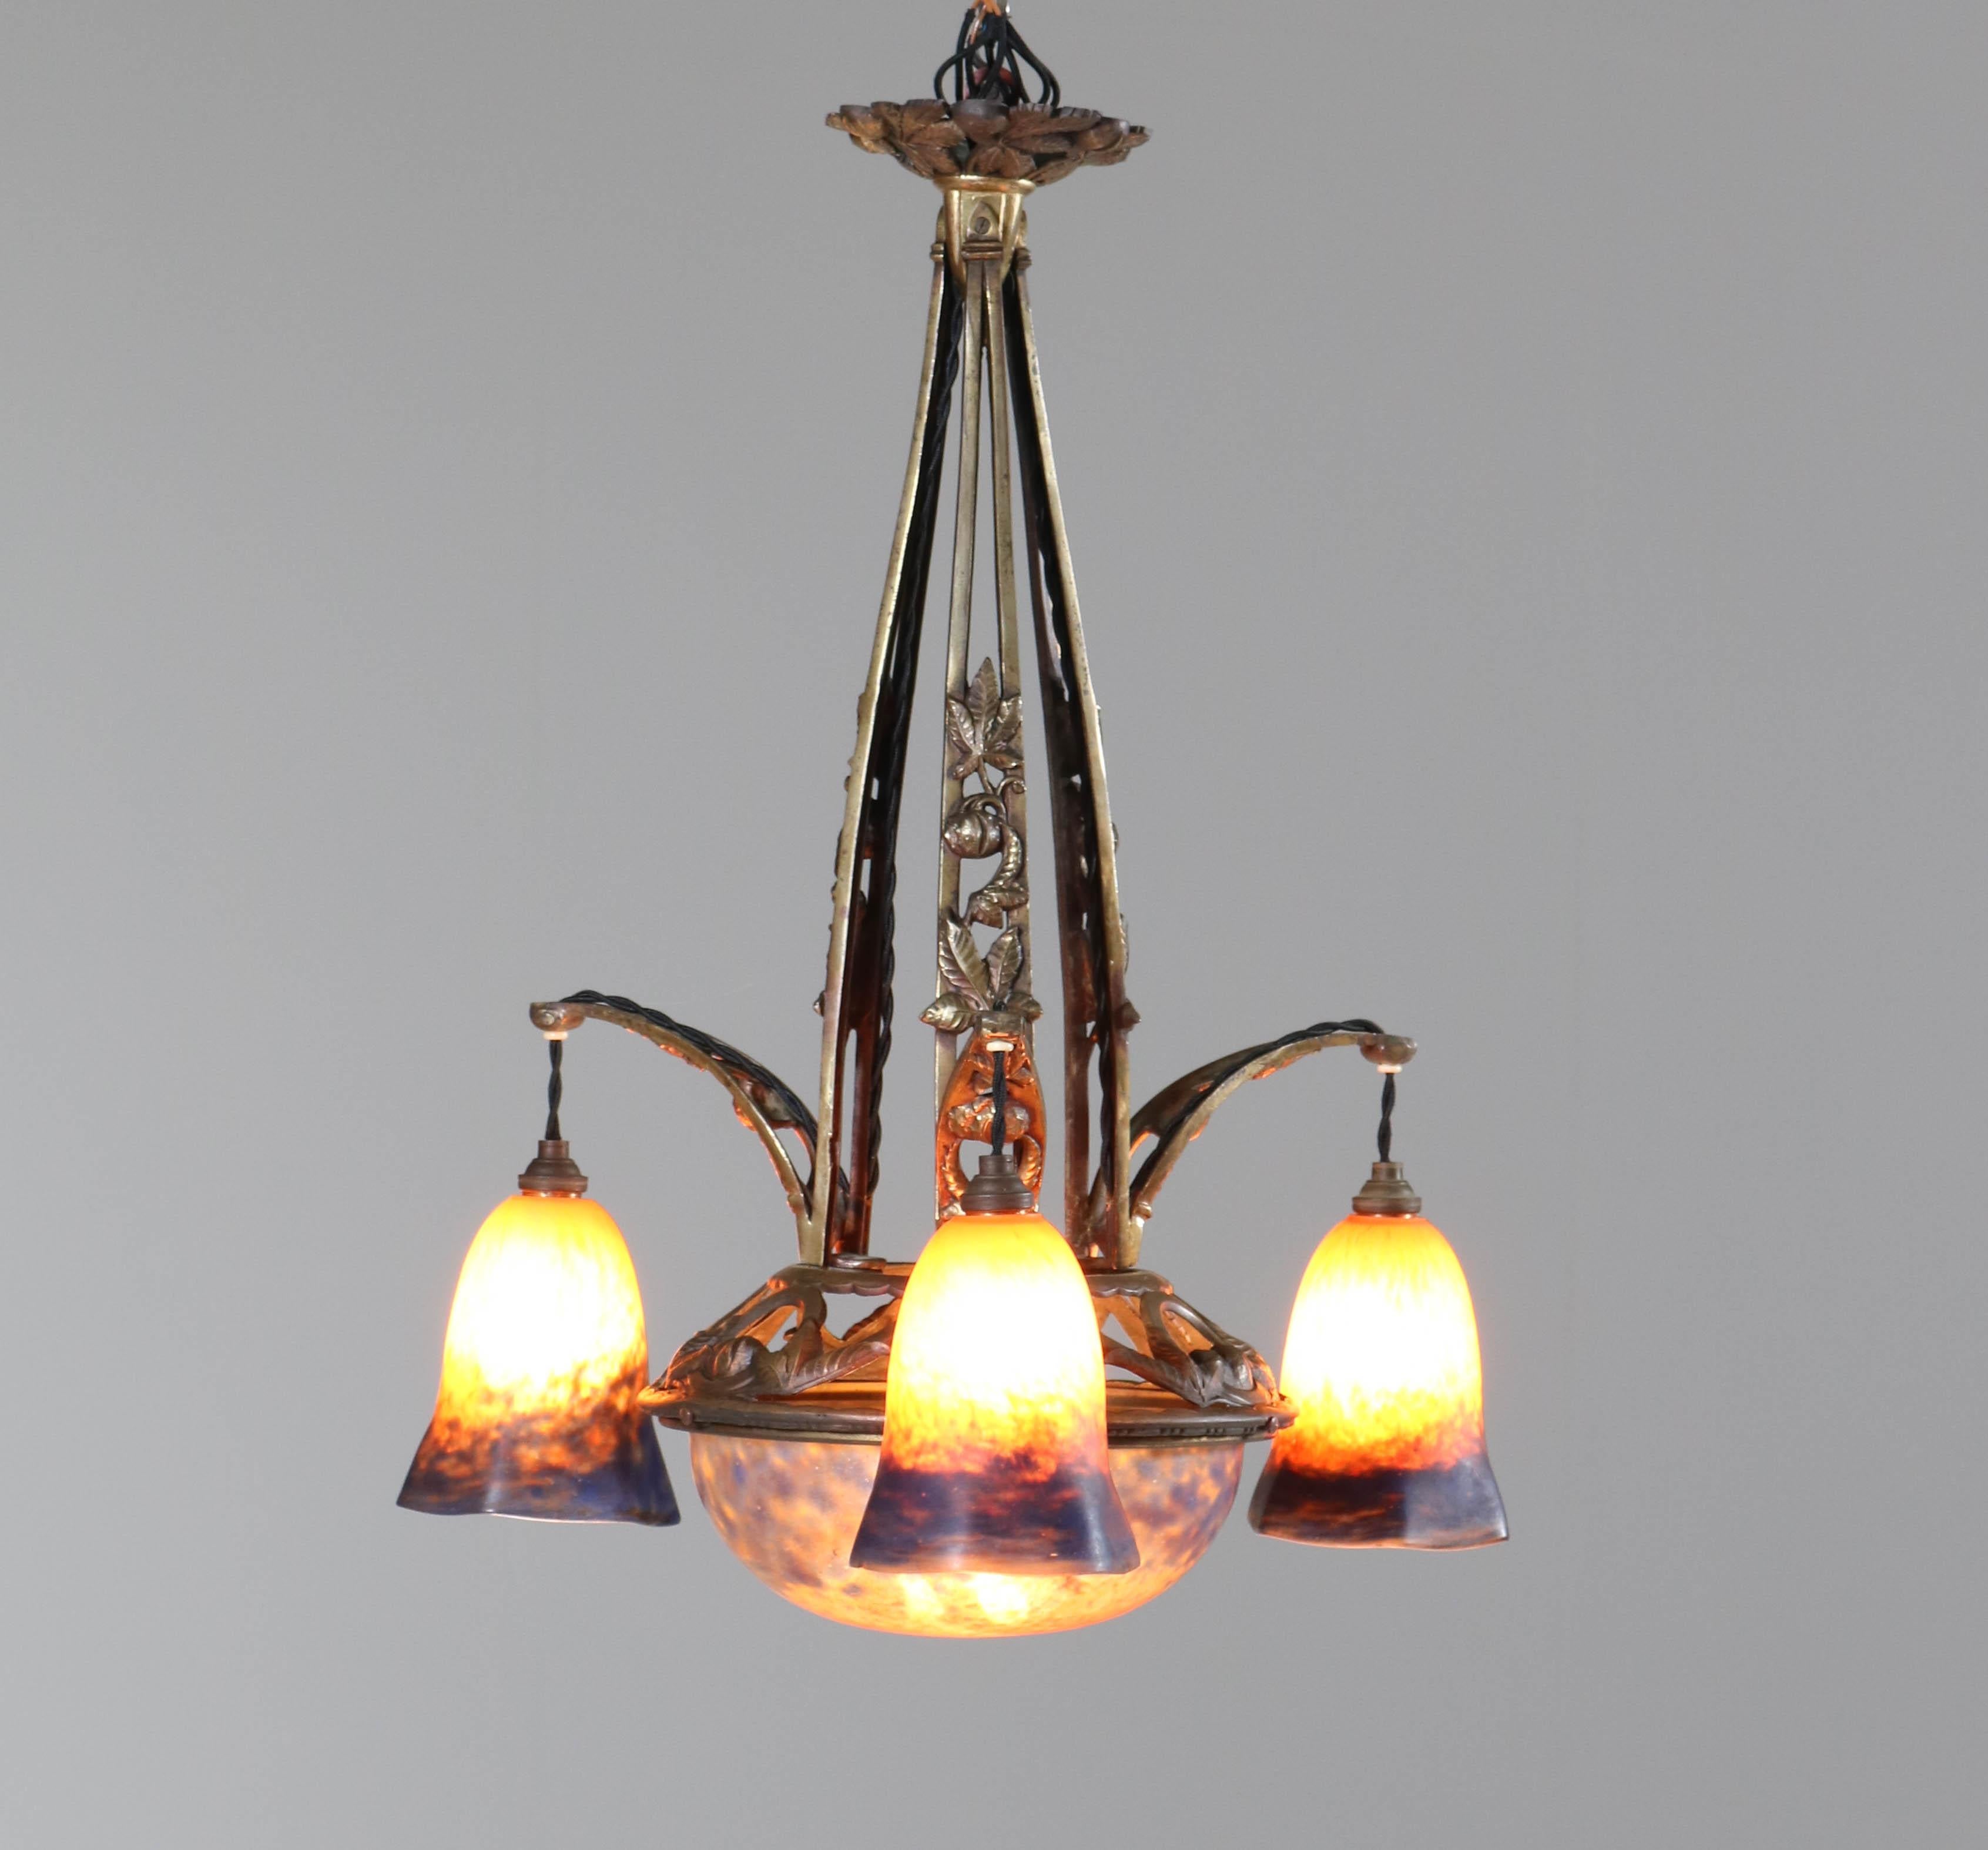 Stunning Art Deco chandelier.
In the style of Muller Freres Luneville.
Striking French design from the thirties.
Original brass frame with original pate de verre glass shades.
Rewired and in very good condition with a beautiful patina.
 